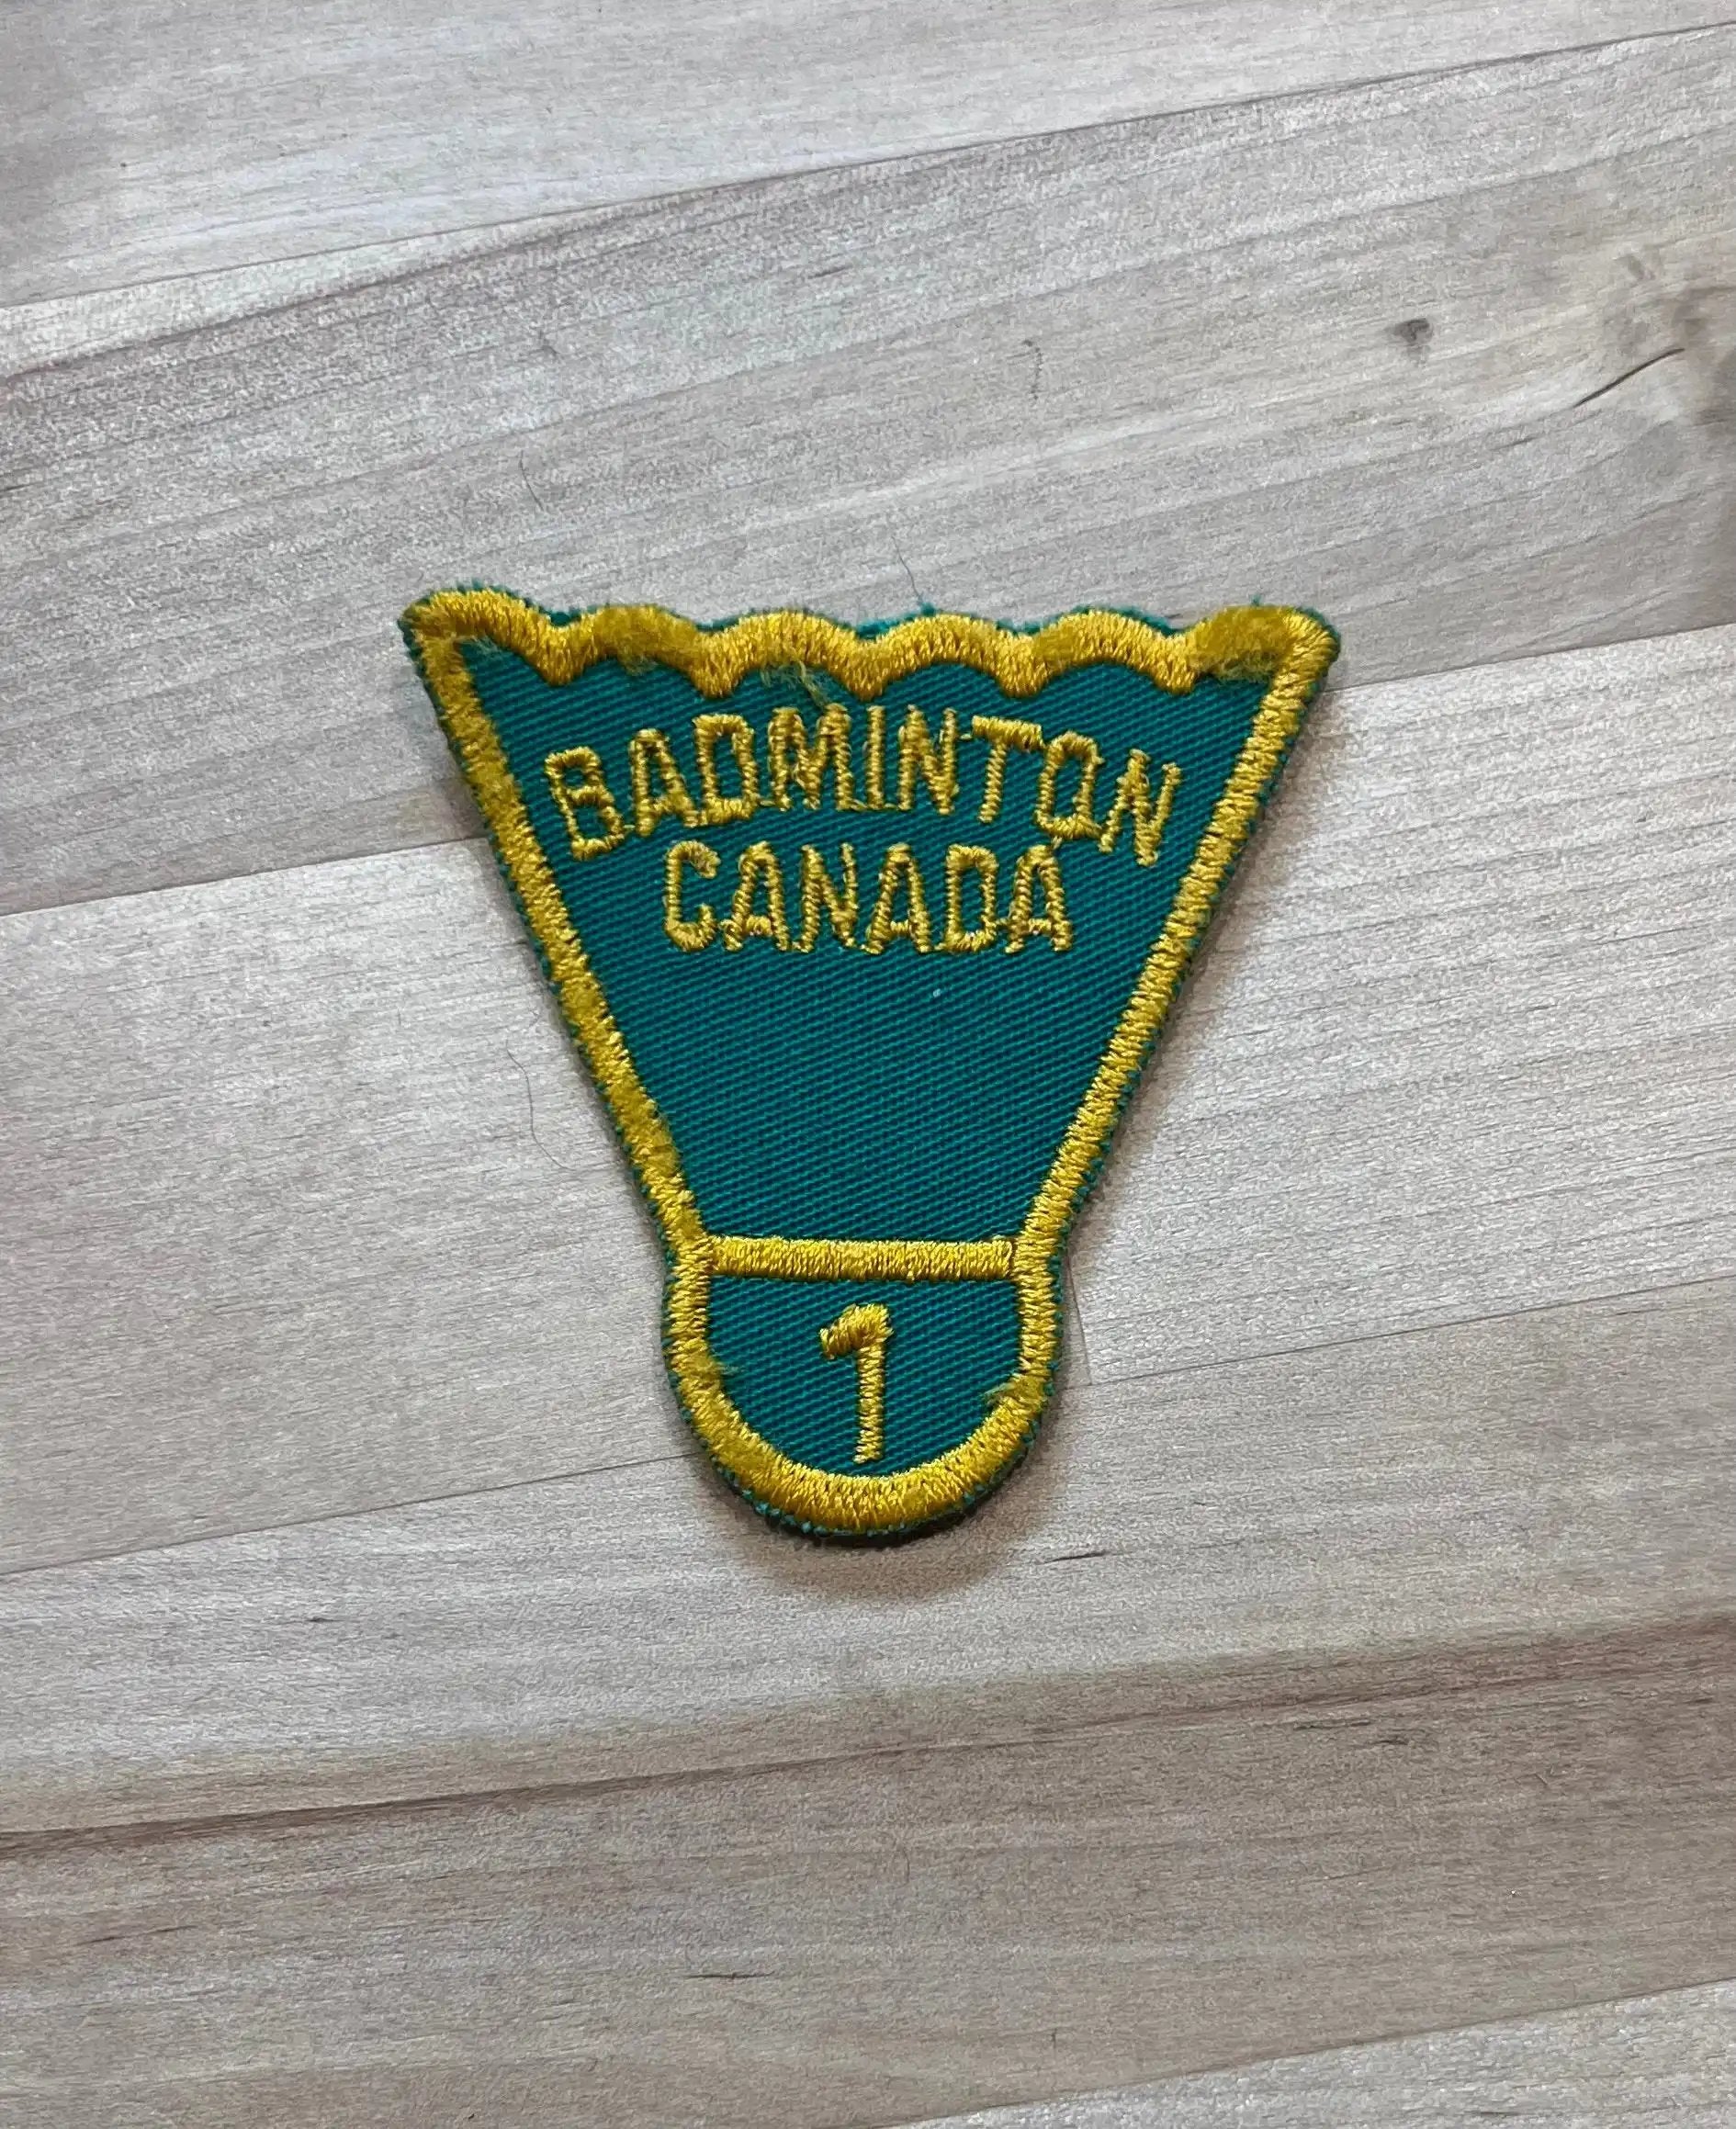 Badminton Canada 1 Birdie Vintage Patch New Old Stock Mint Sport Item Relic has been safely stored away for decades and uniquely measures approx a 2 inch birdie